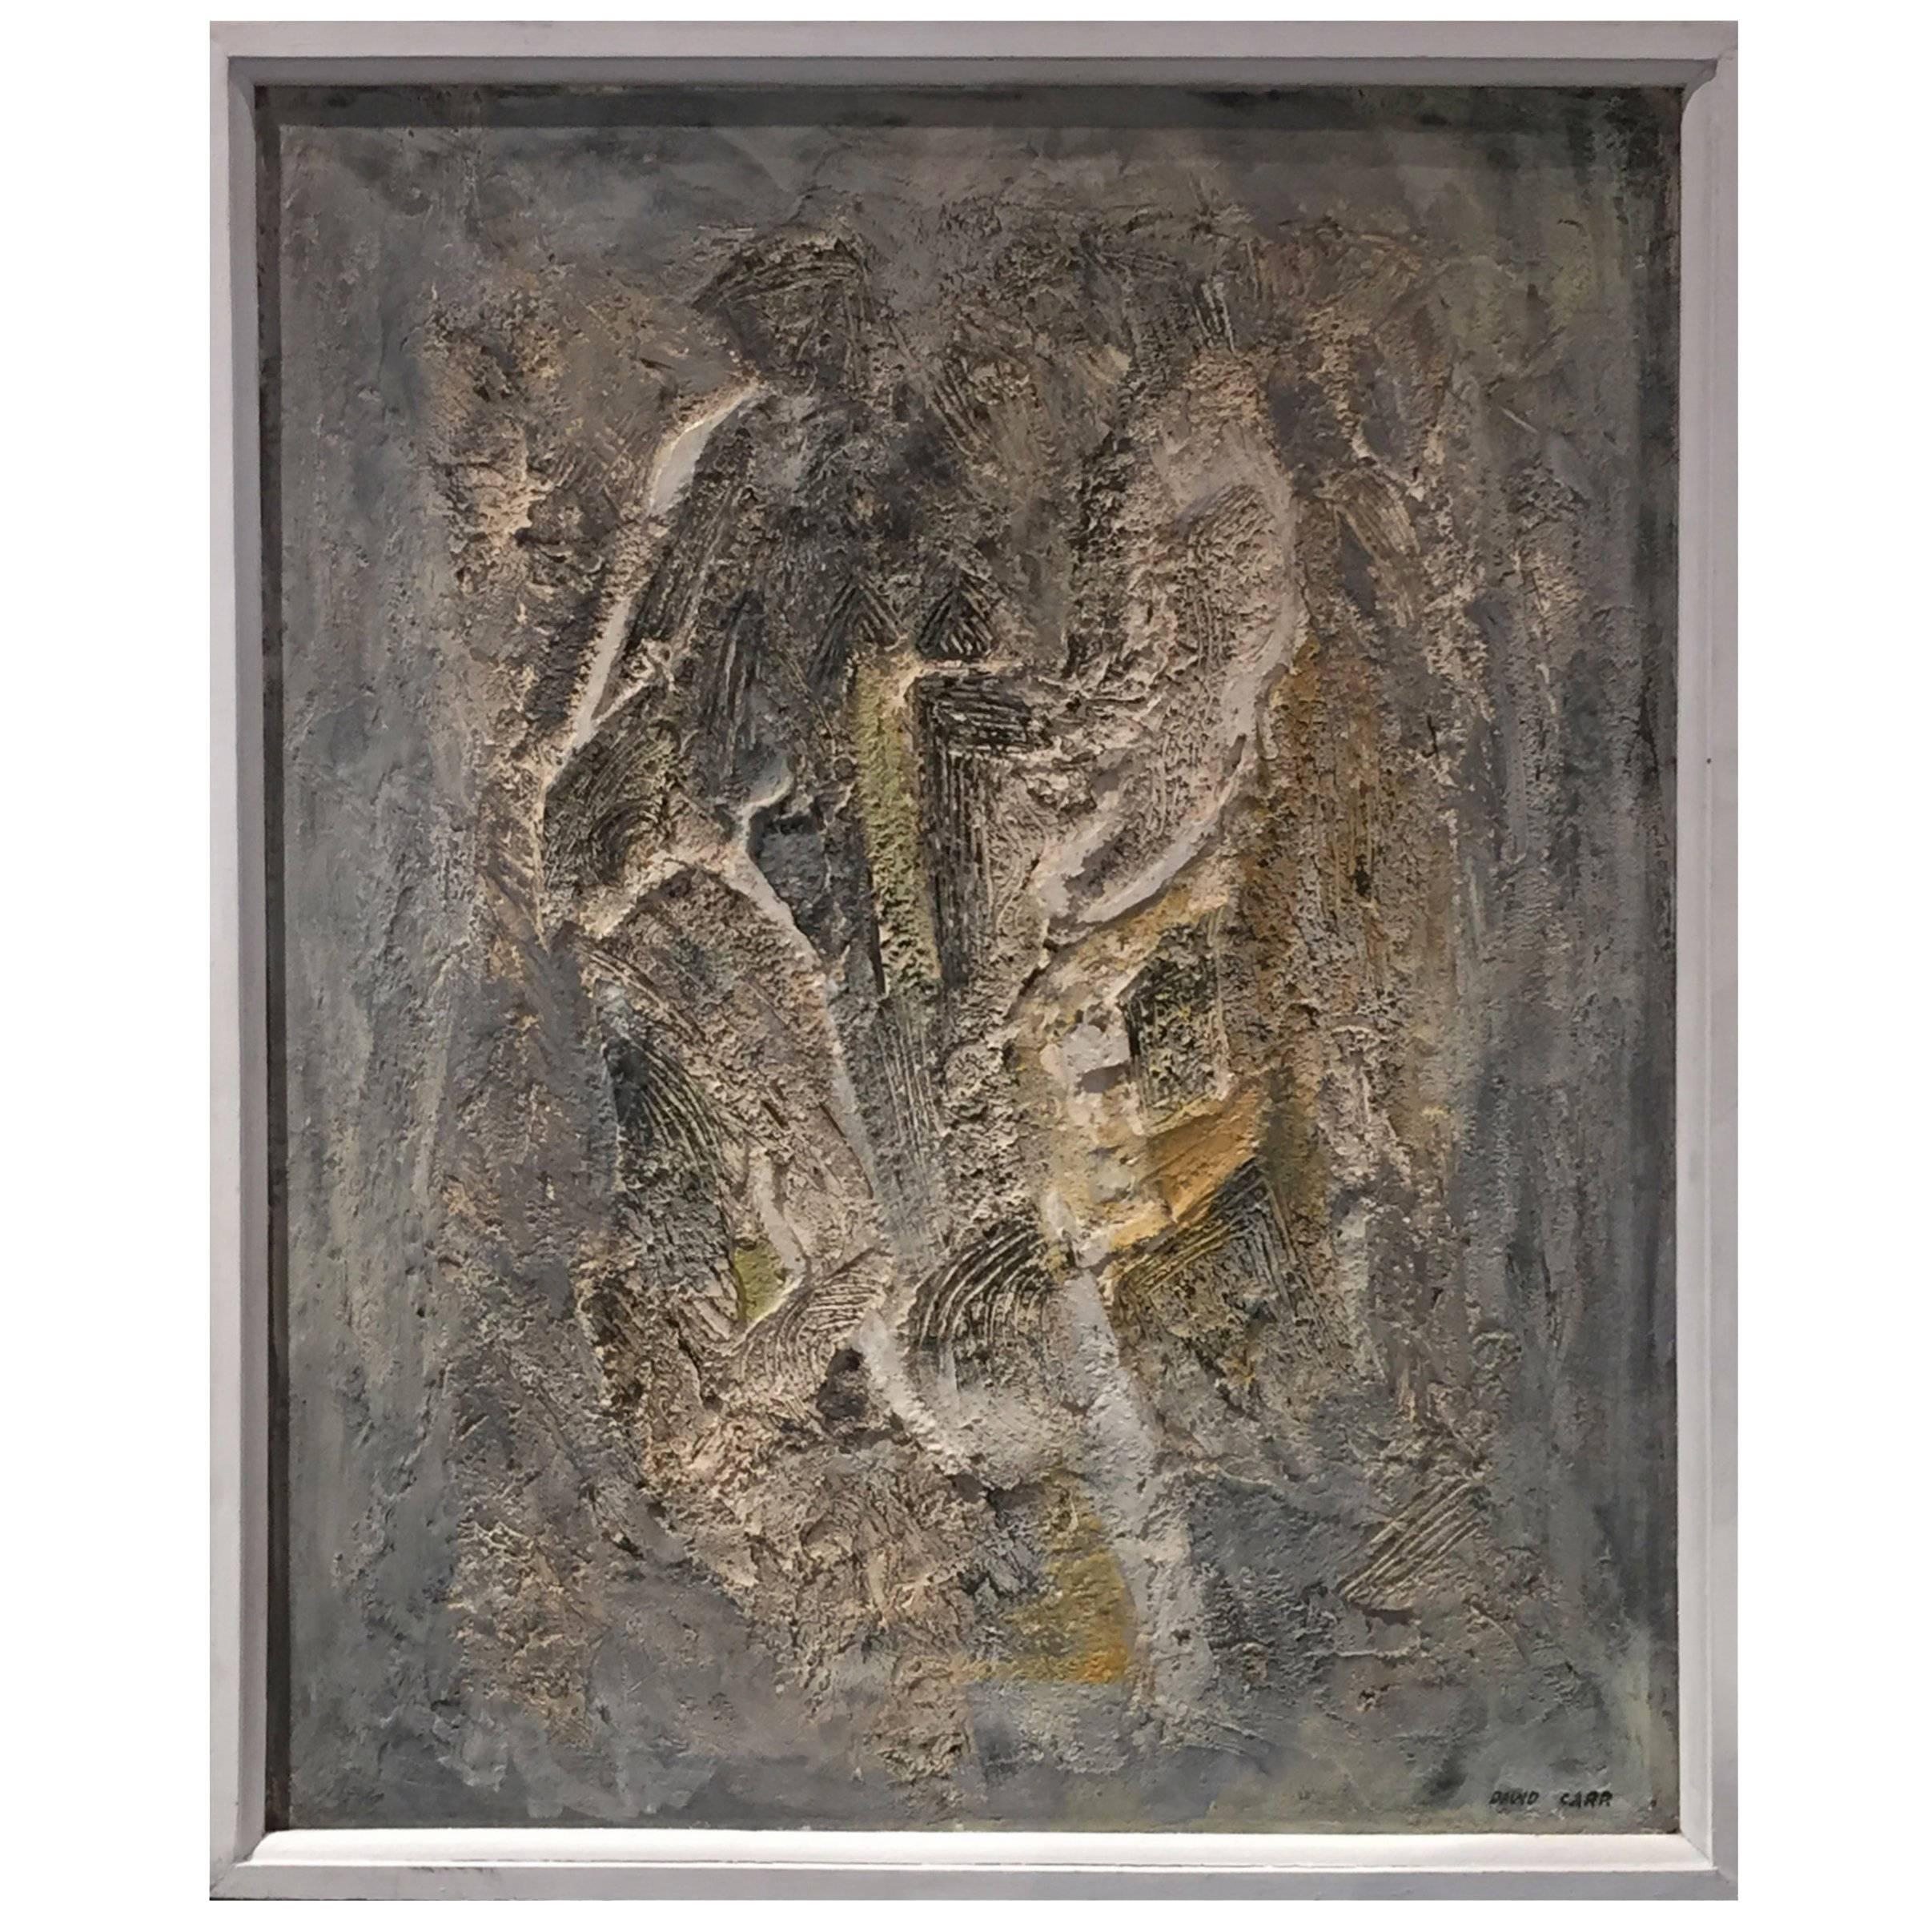 Framed Abstract Mixed Media Artwork by David Carr, Signed